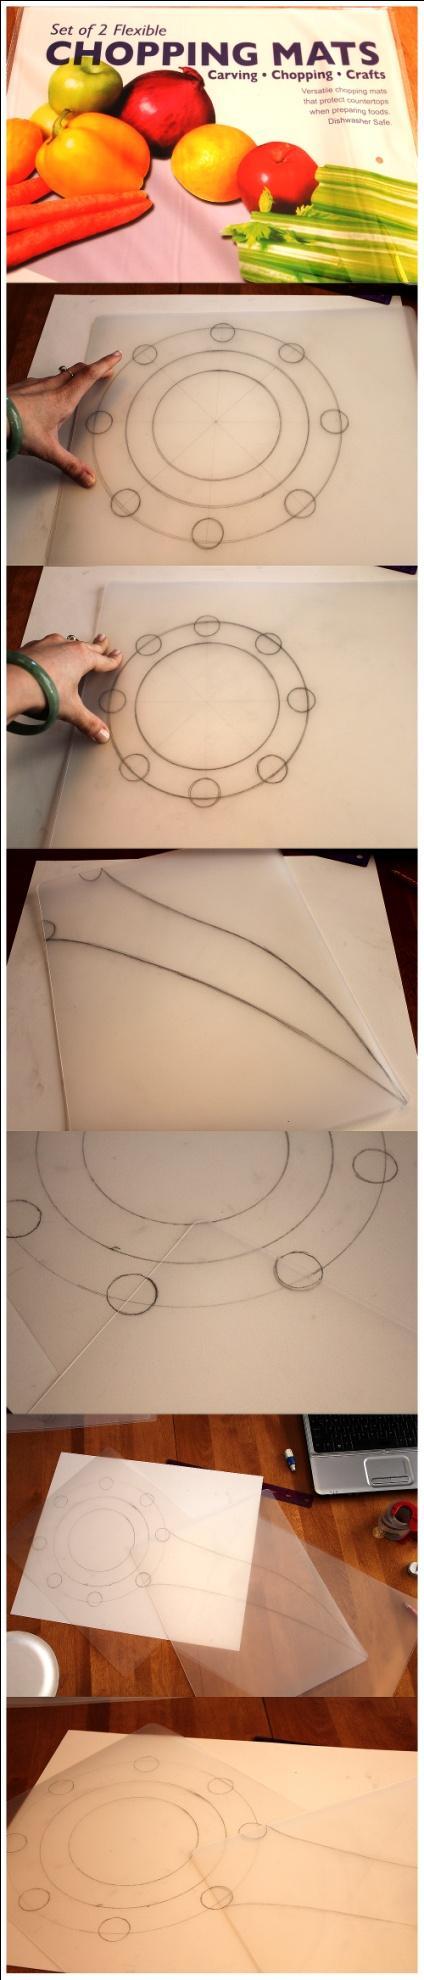 com/cb/thiefdaggers_rikku.html I created a pattern for the large circles, small circles and blades and cut them out on chopping mats.